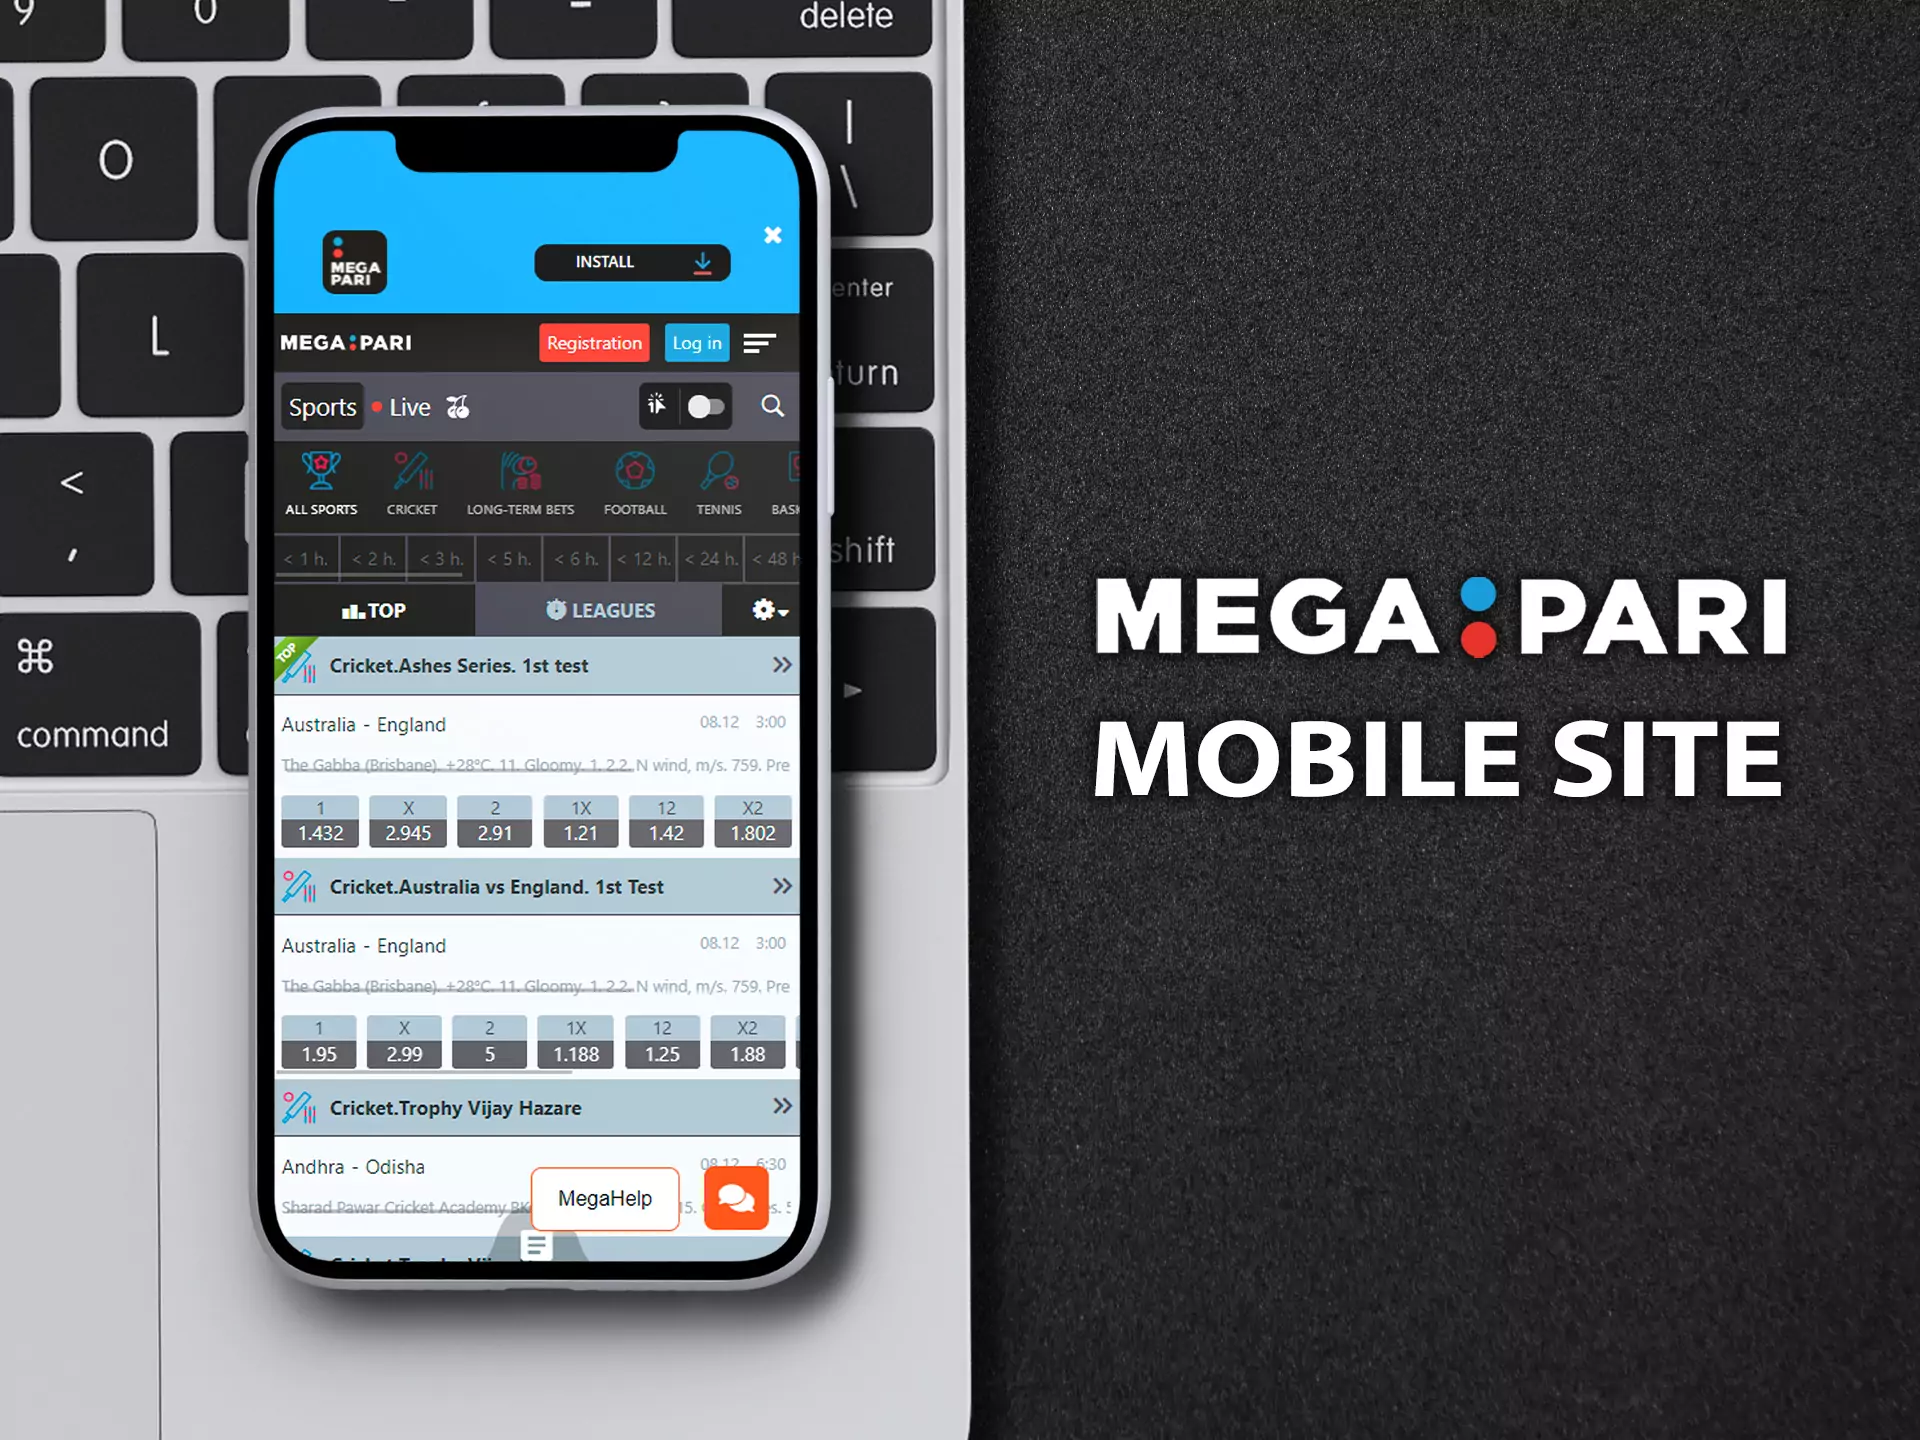 If you don't want to install the app, use the MegaPari browser version on your smartphone.